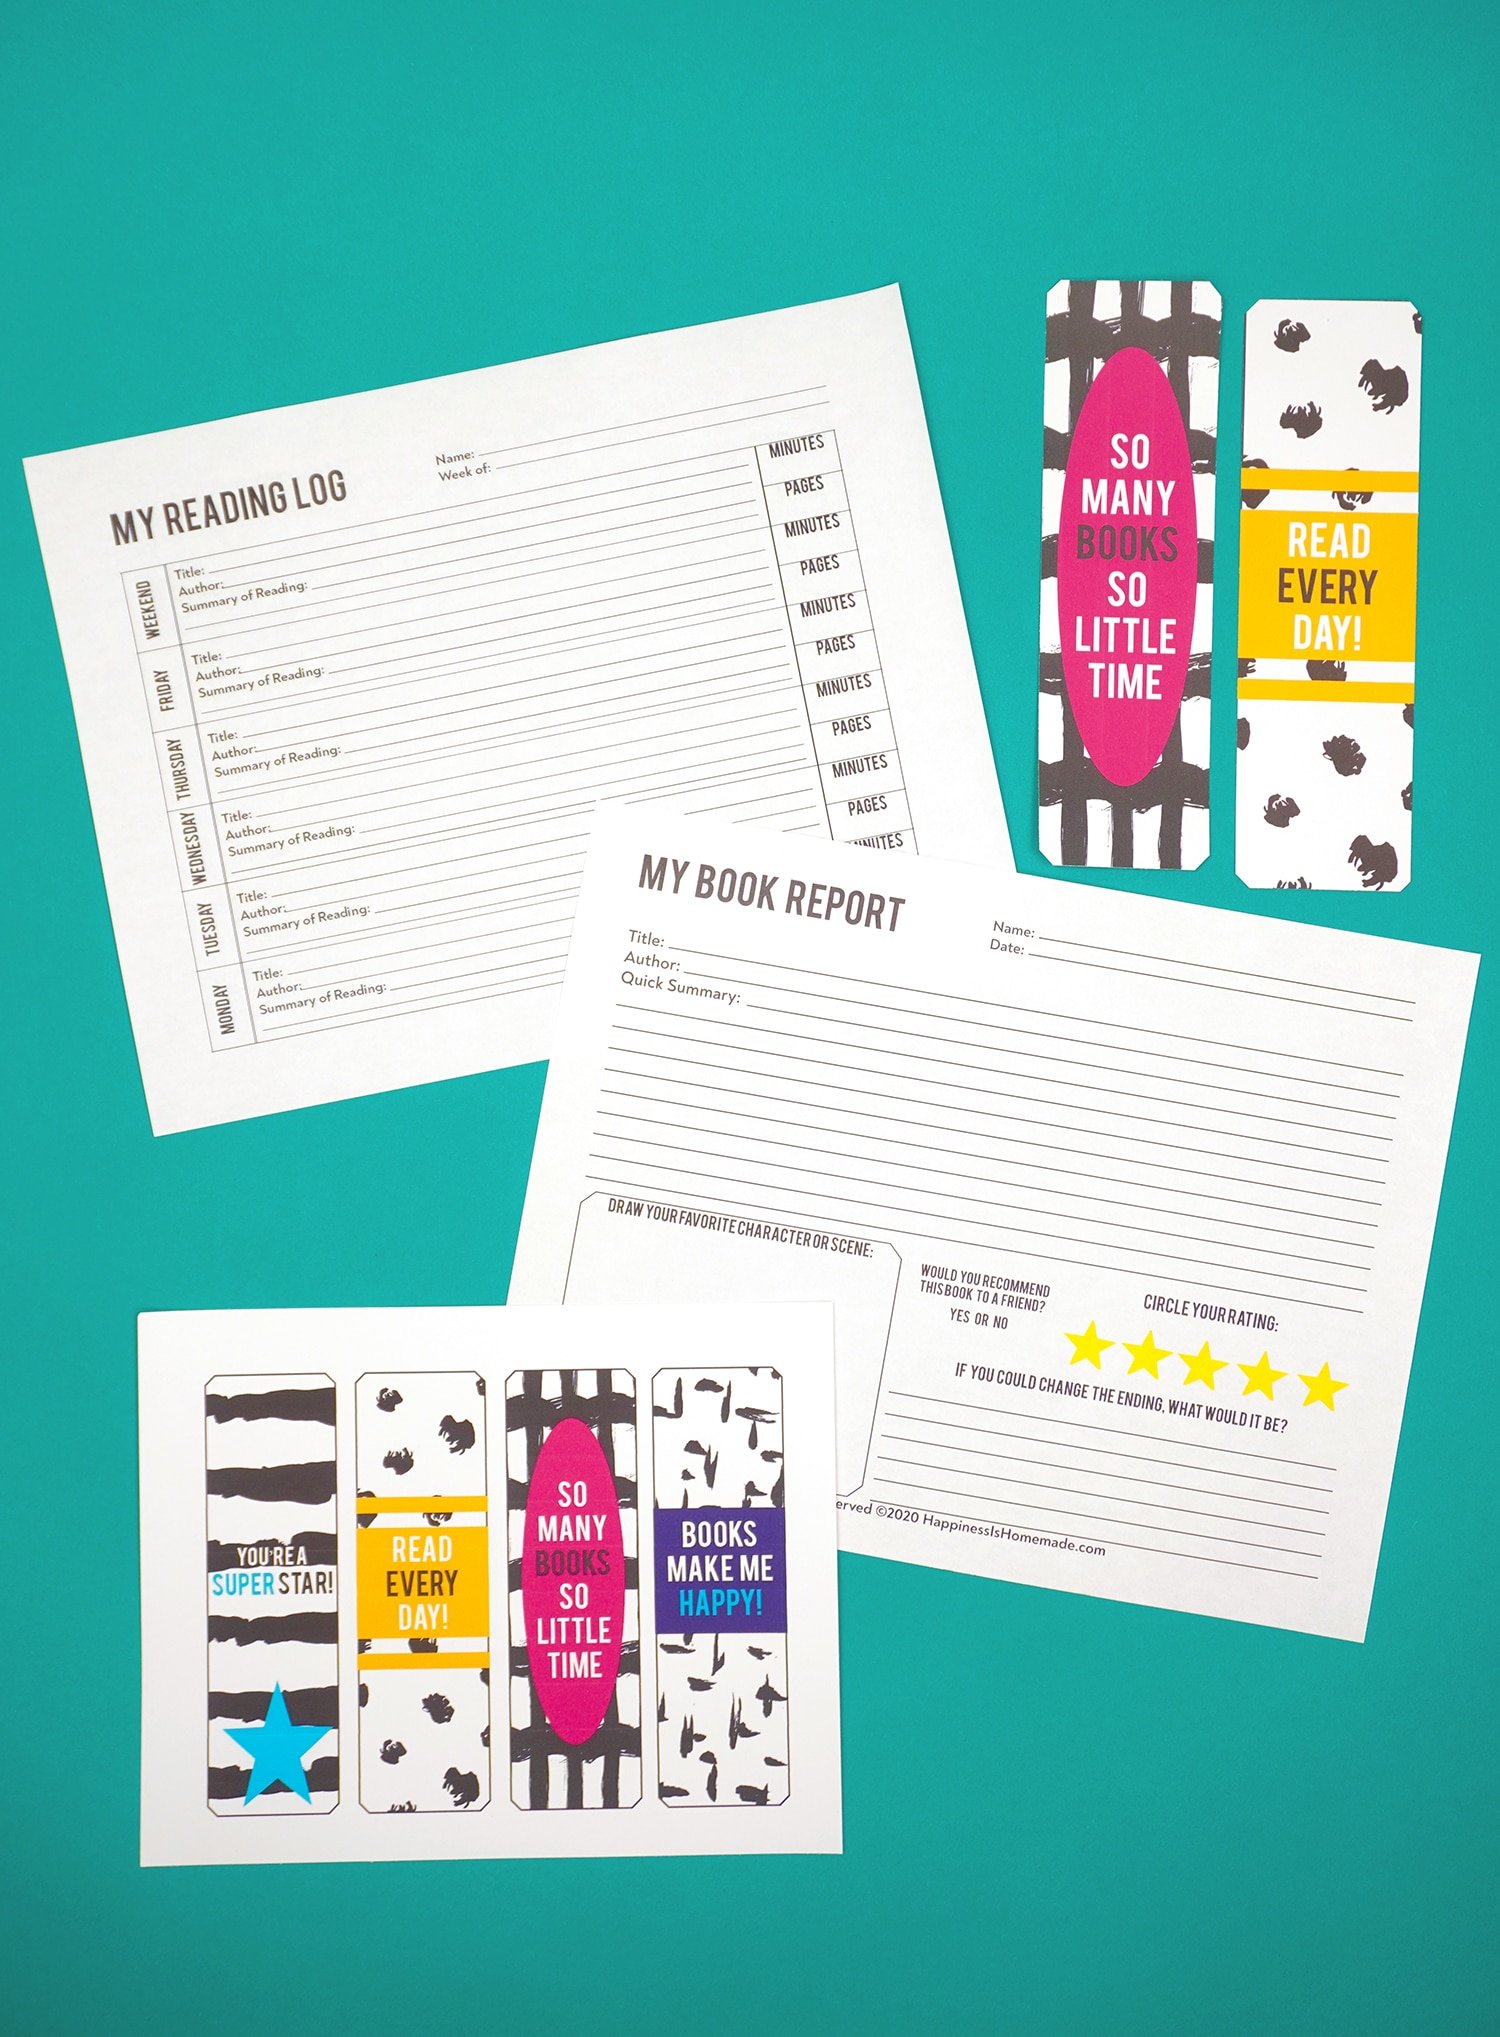 Printable reading log and book report forms with bookmarks on teal background